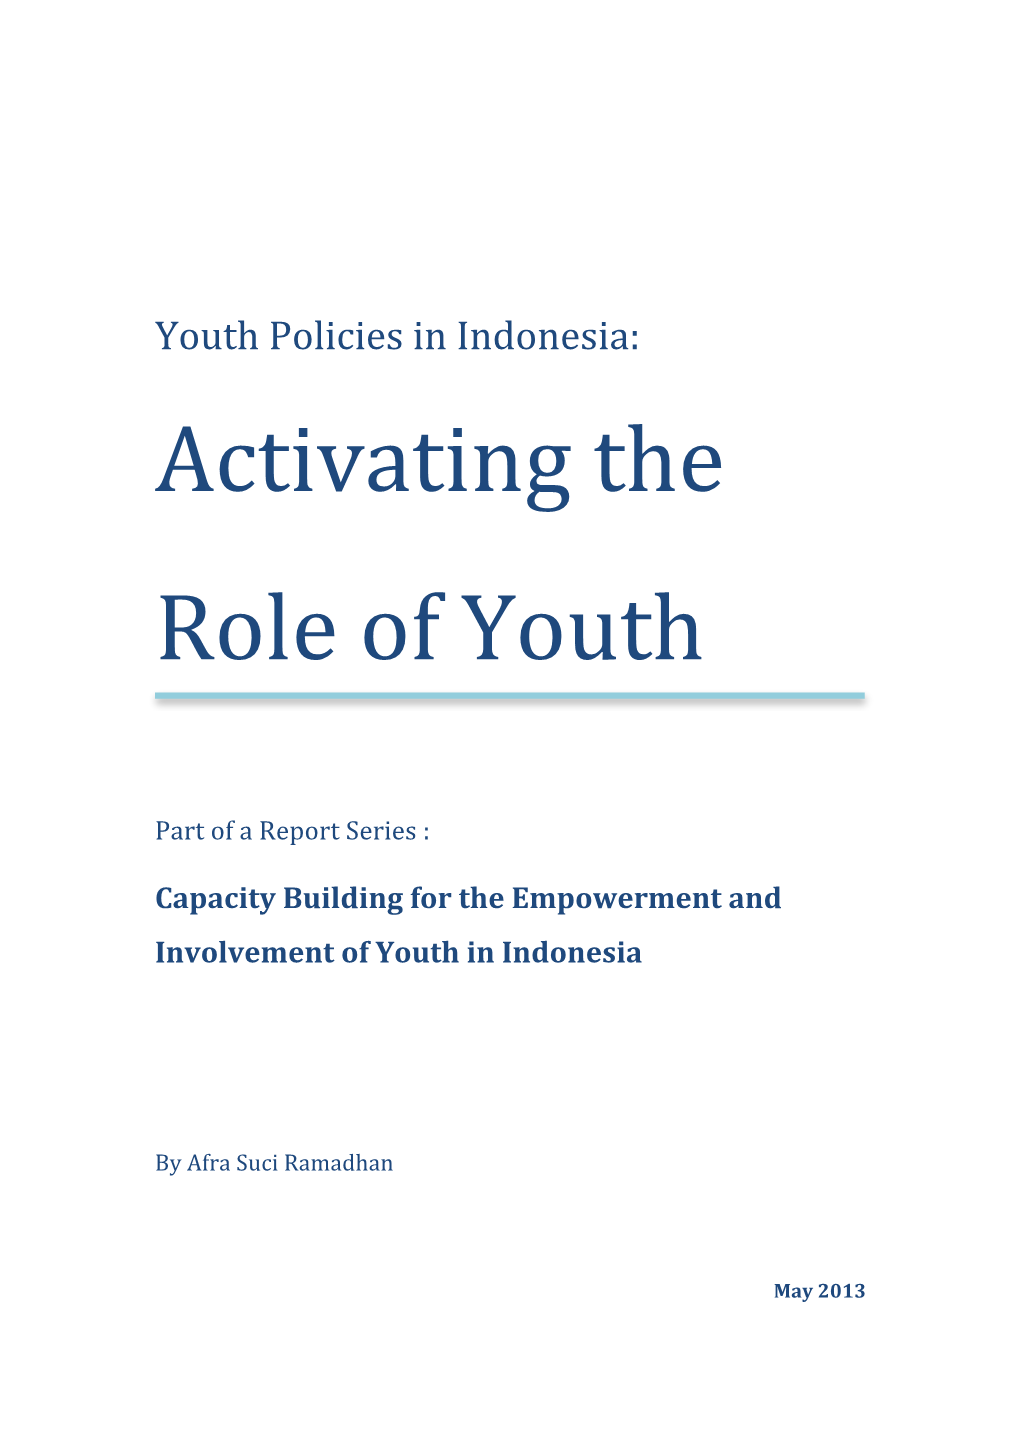 Indonesia: Activating the Role of Youth